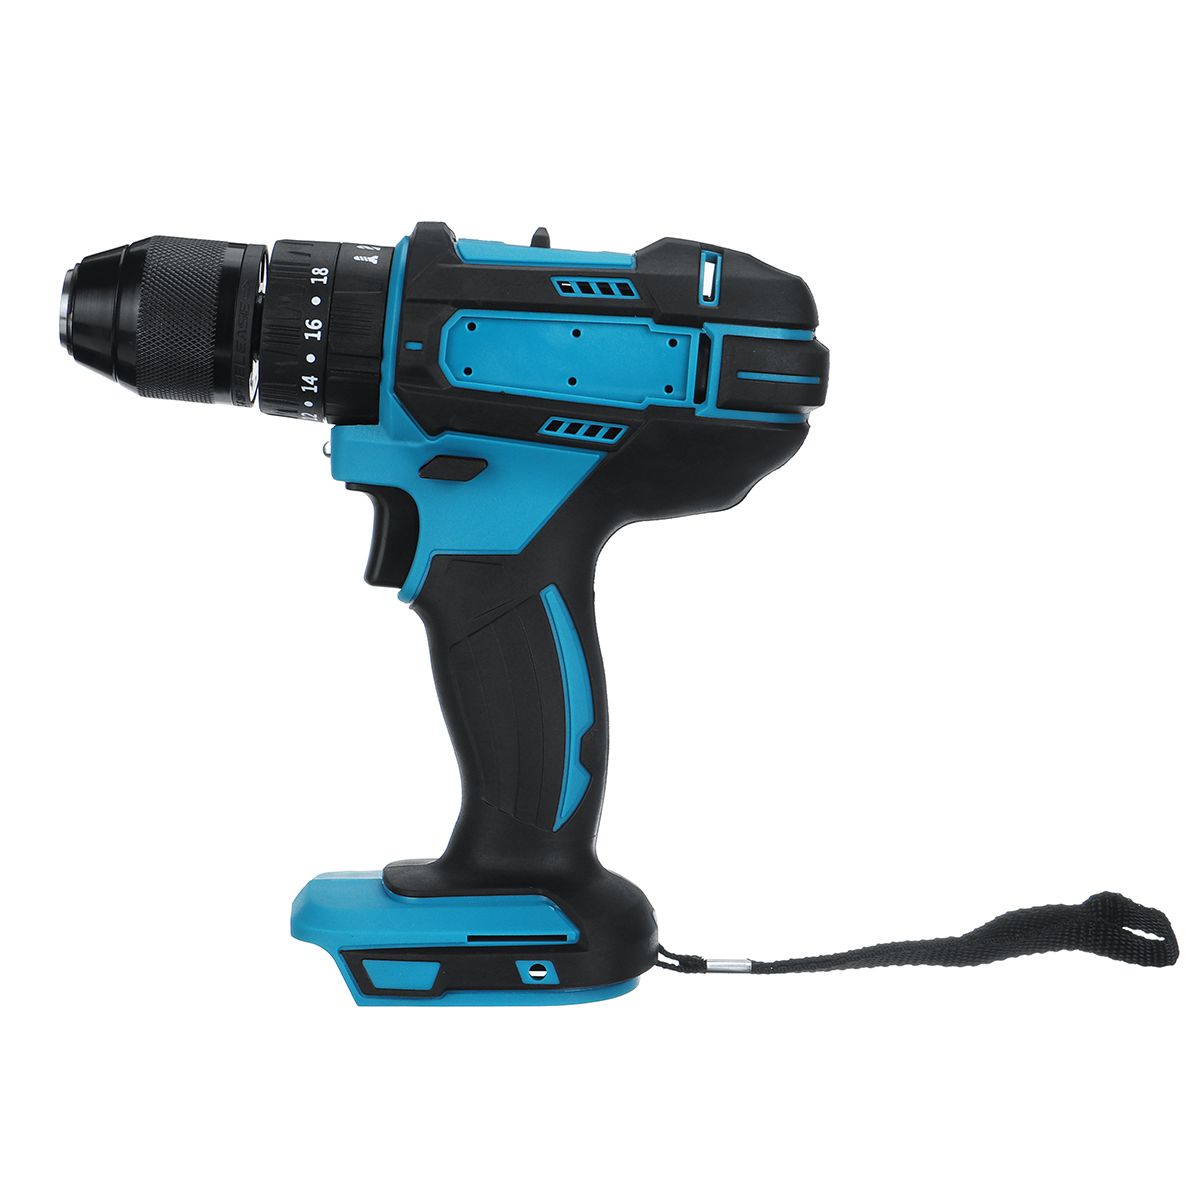 18V-Cordless-Electric-Impact-Drill-2-Speed-Power-Screwdriver-Adapted-To-18V-Makita-battery-1627343